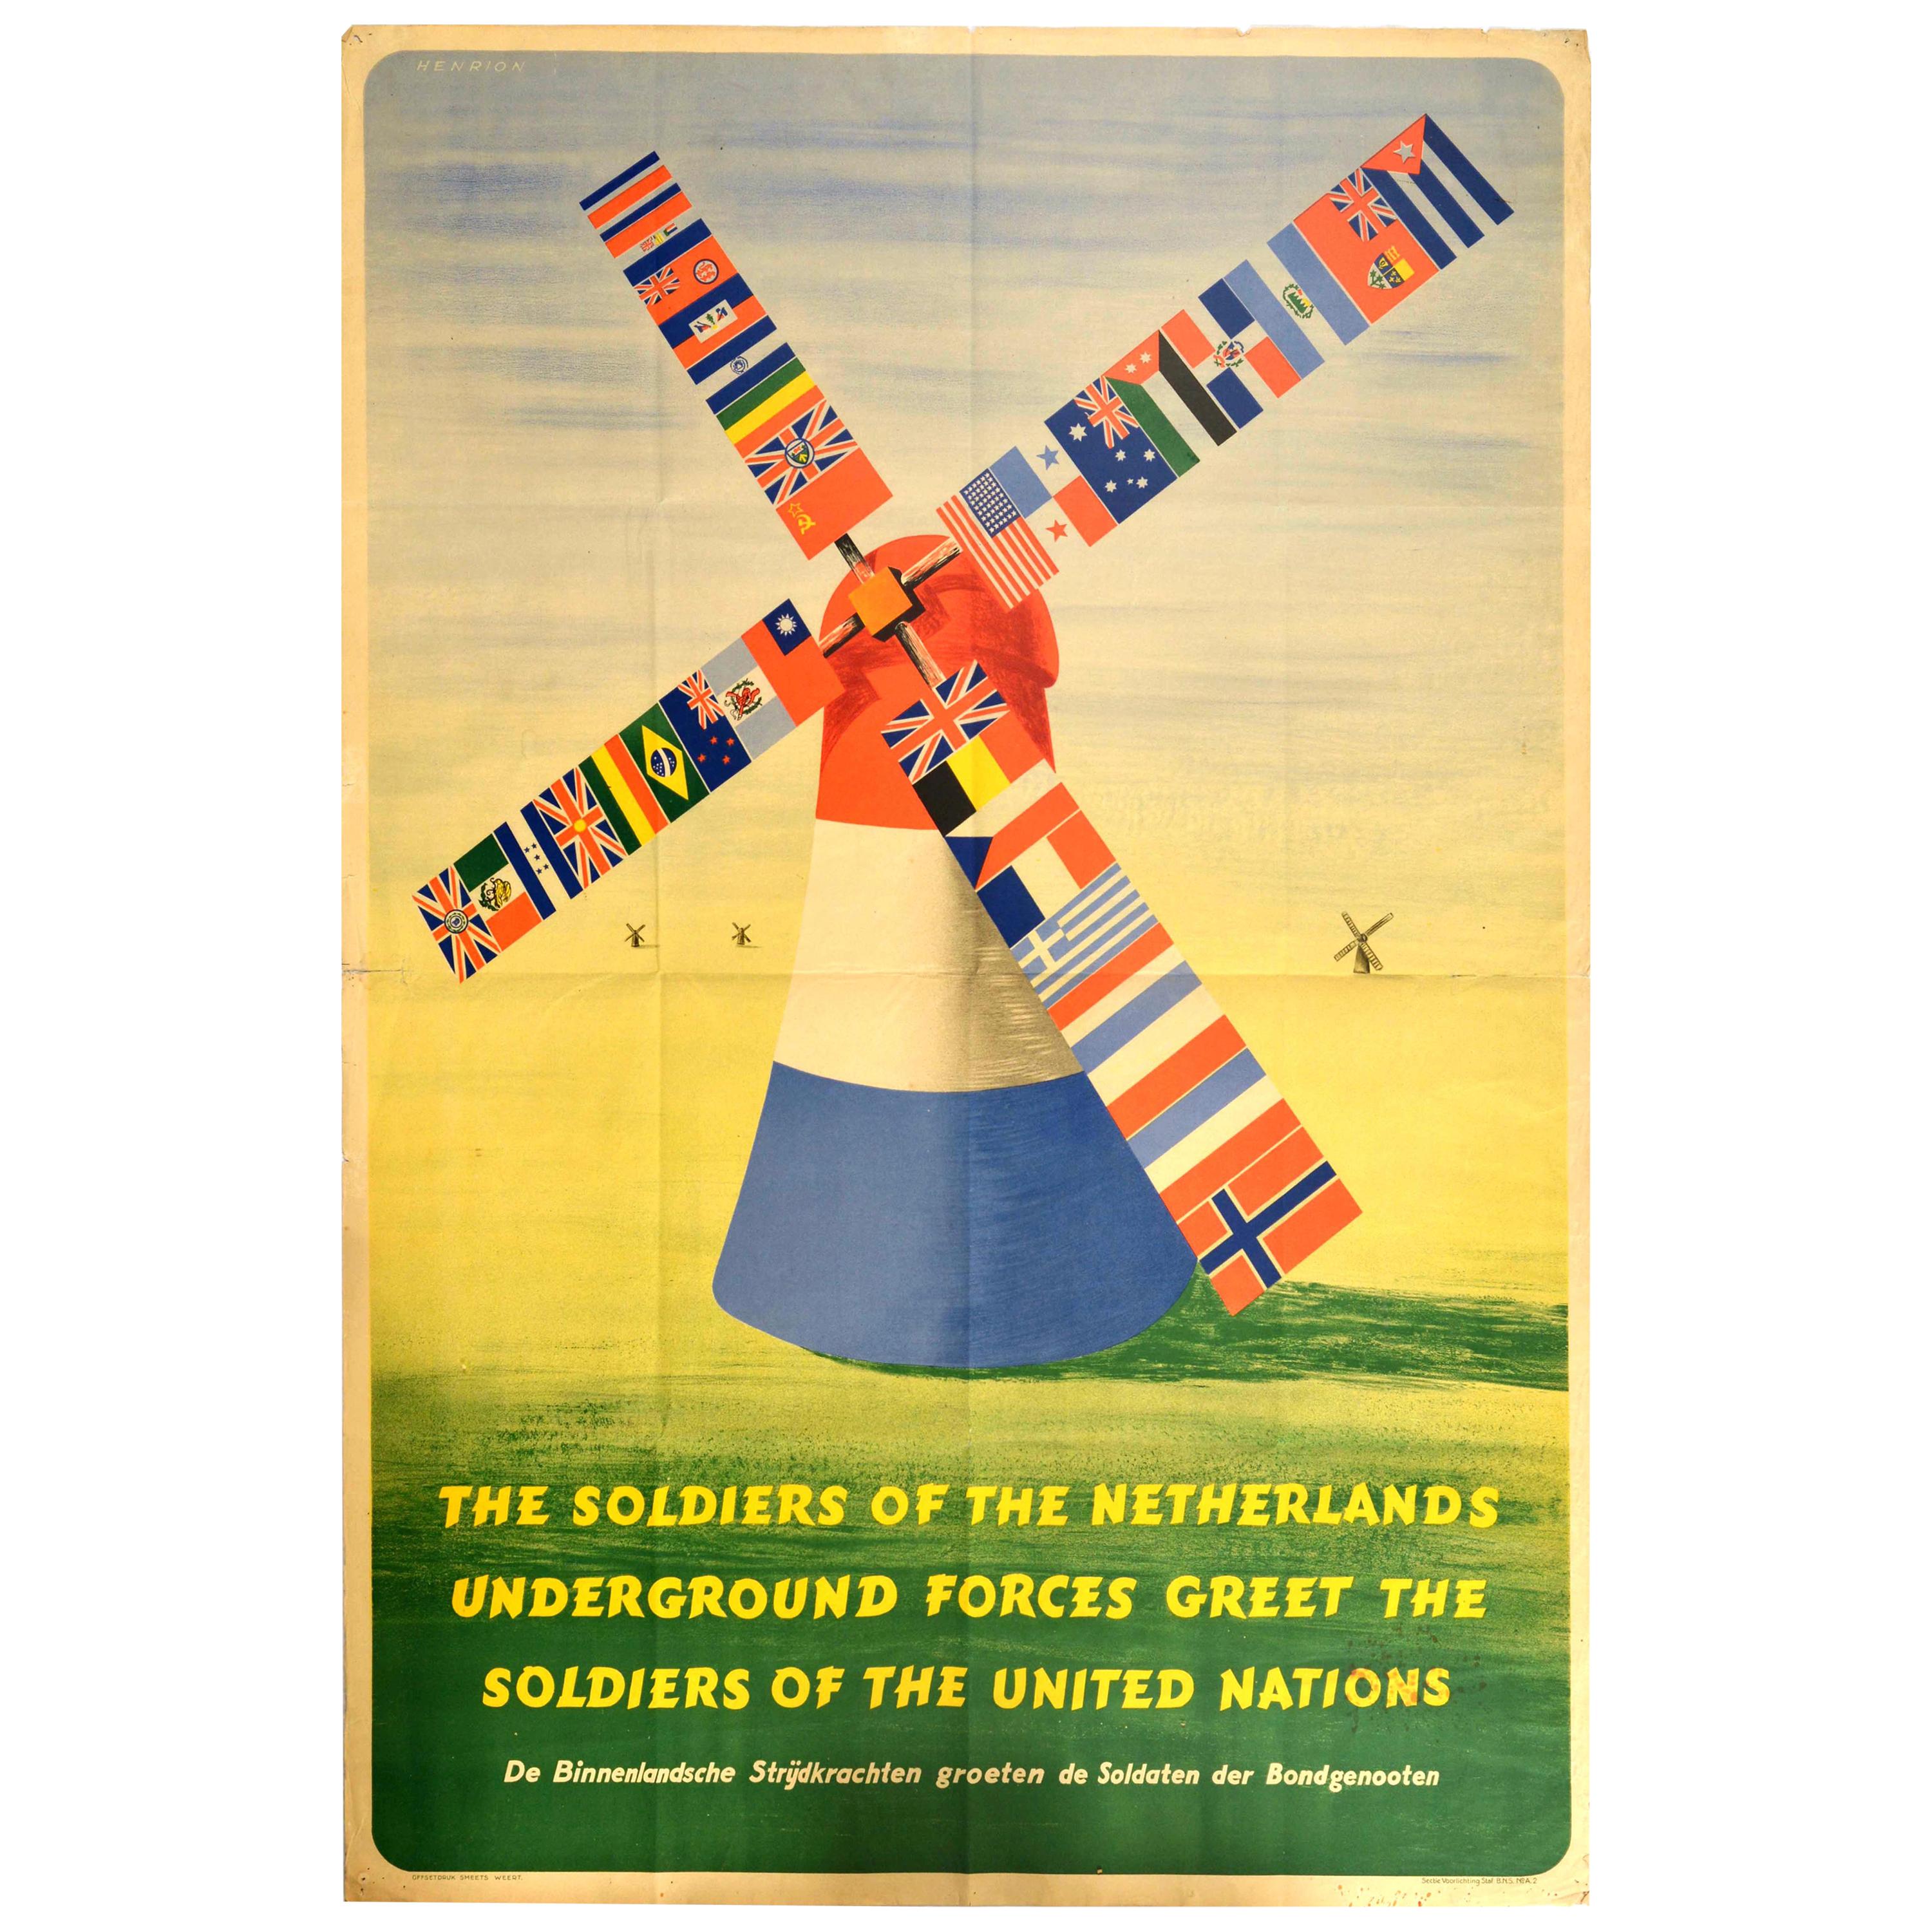 Original Vintage Poster Dutch Resistance Allied Soldiers United Nations WWII Art